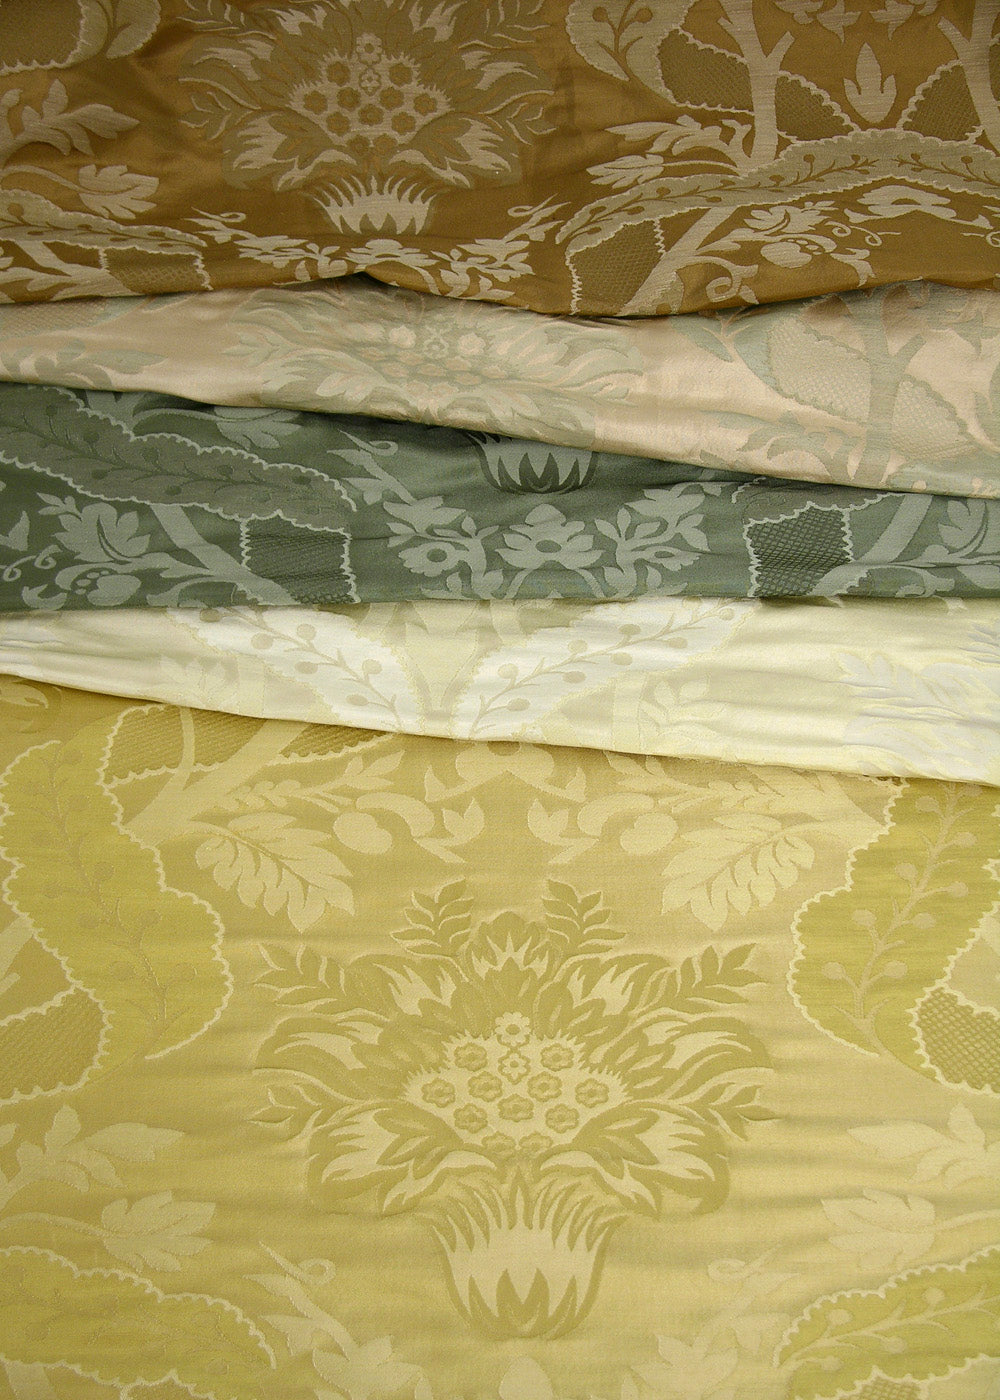 stack of woven damask fabrics in several colors